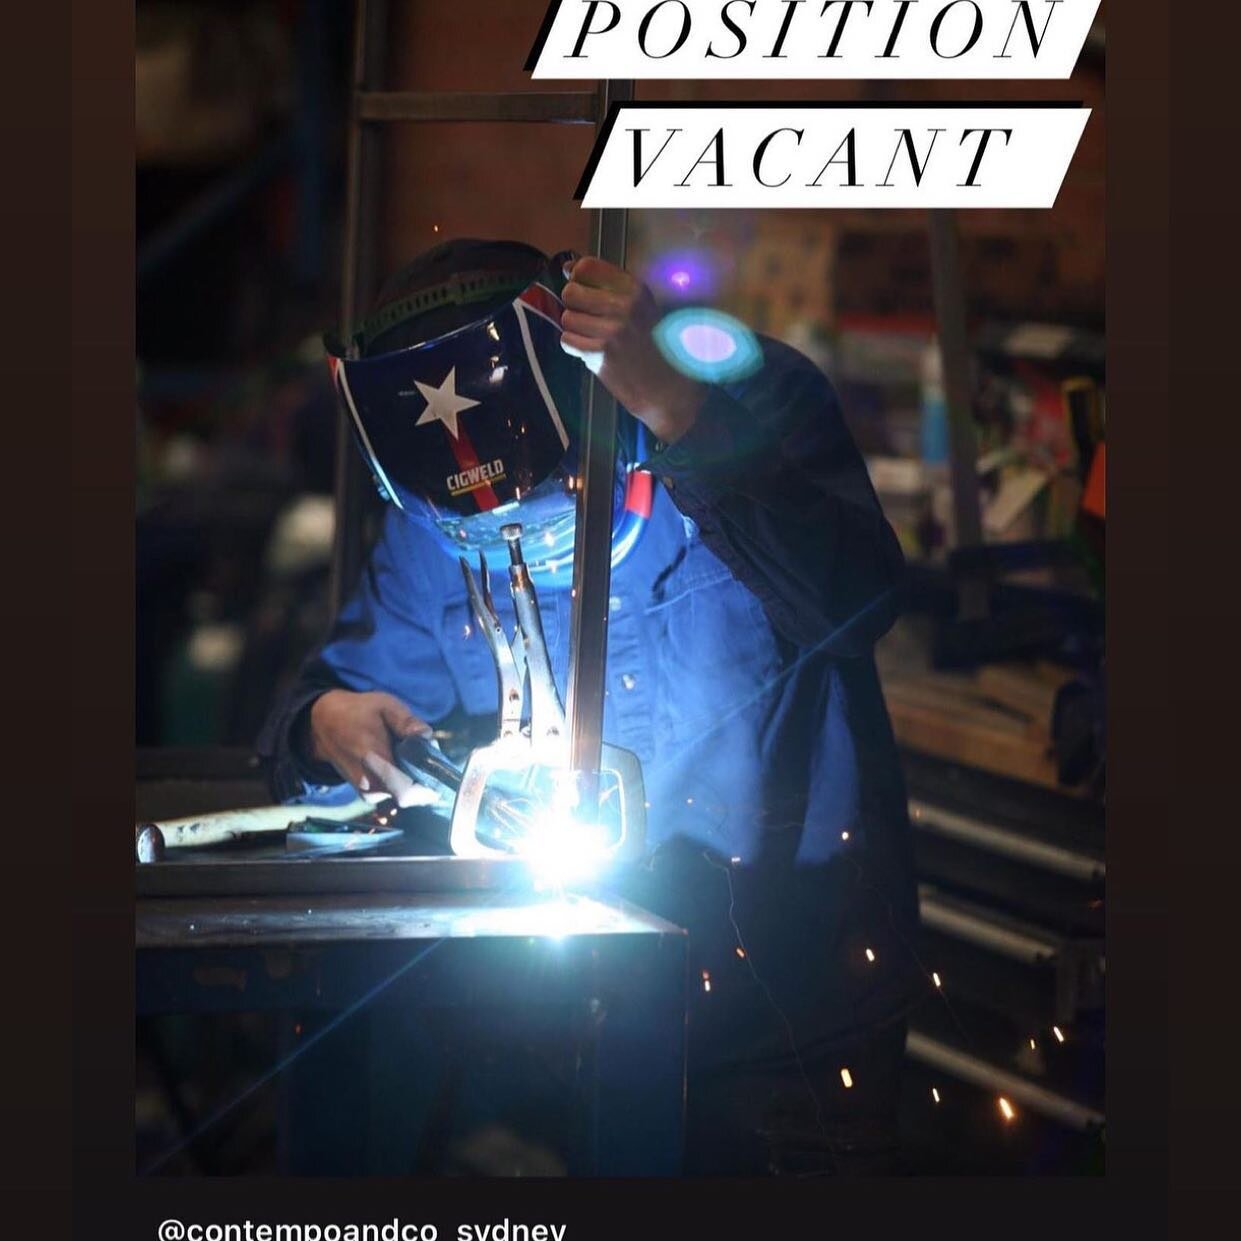 A Full-time Position is available for an experienced Metal Fabricator who holds an Engineering Fabrication (Light) Trade Certificate

We are ideally looking for applicants with the following Skills:

* TIG &amp; MIG Welding skills

* Ferrous &amp; No